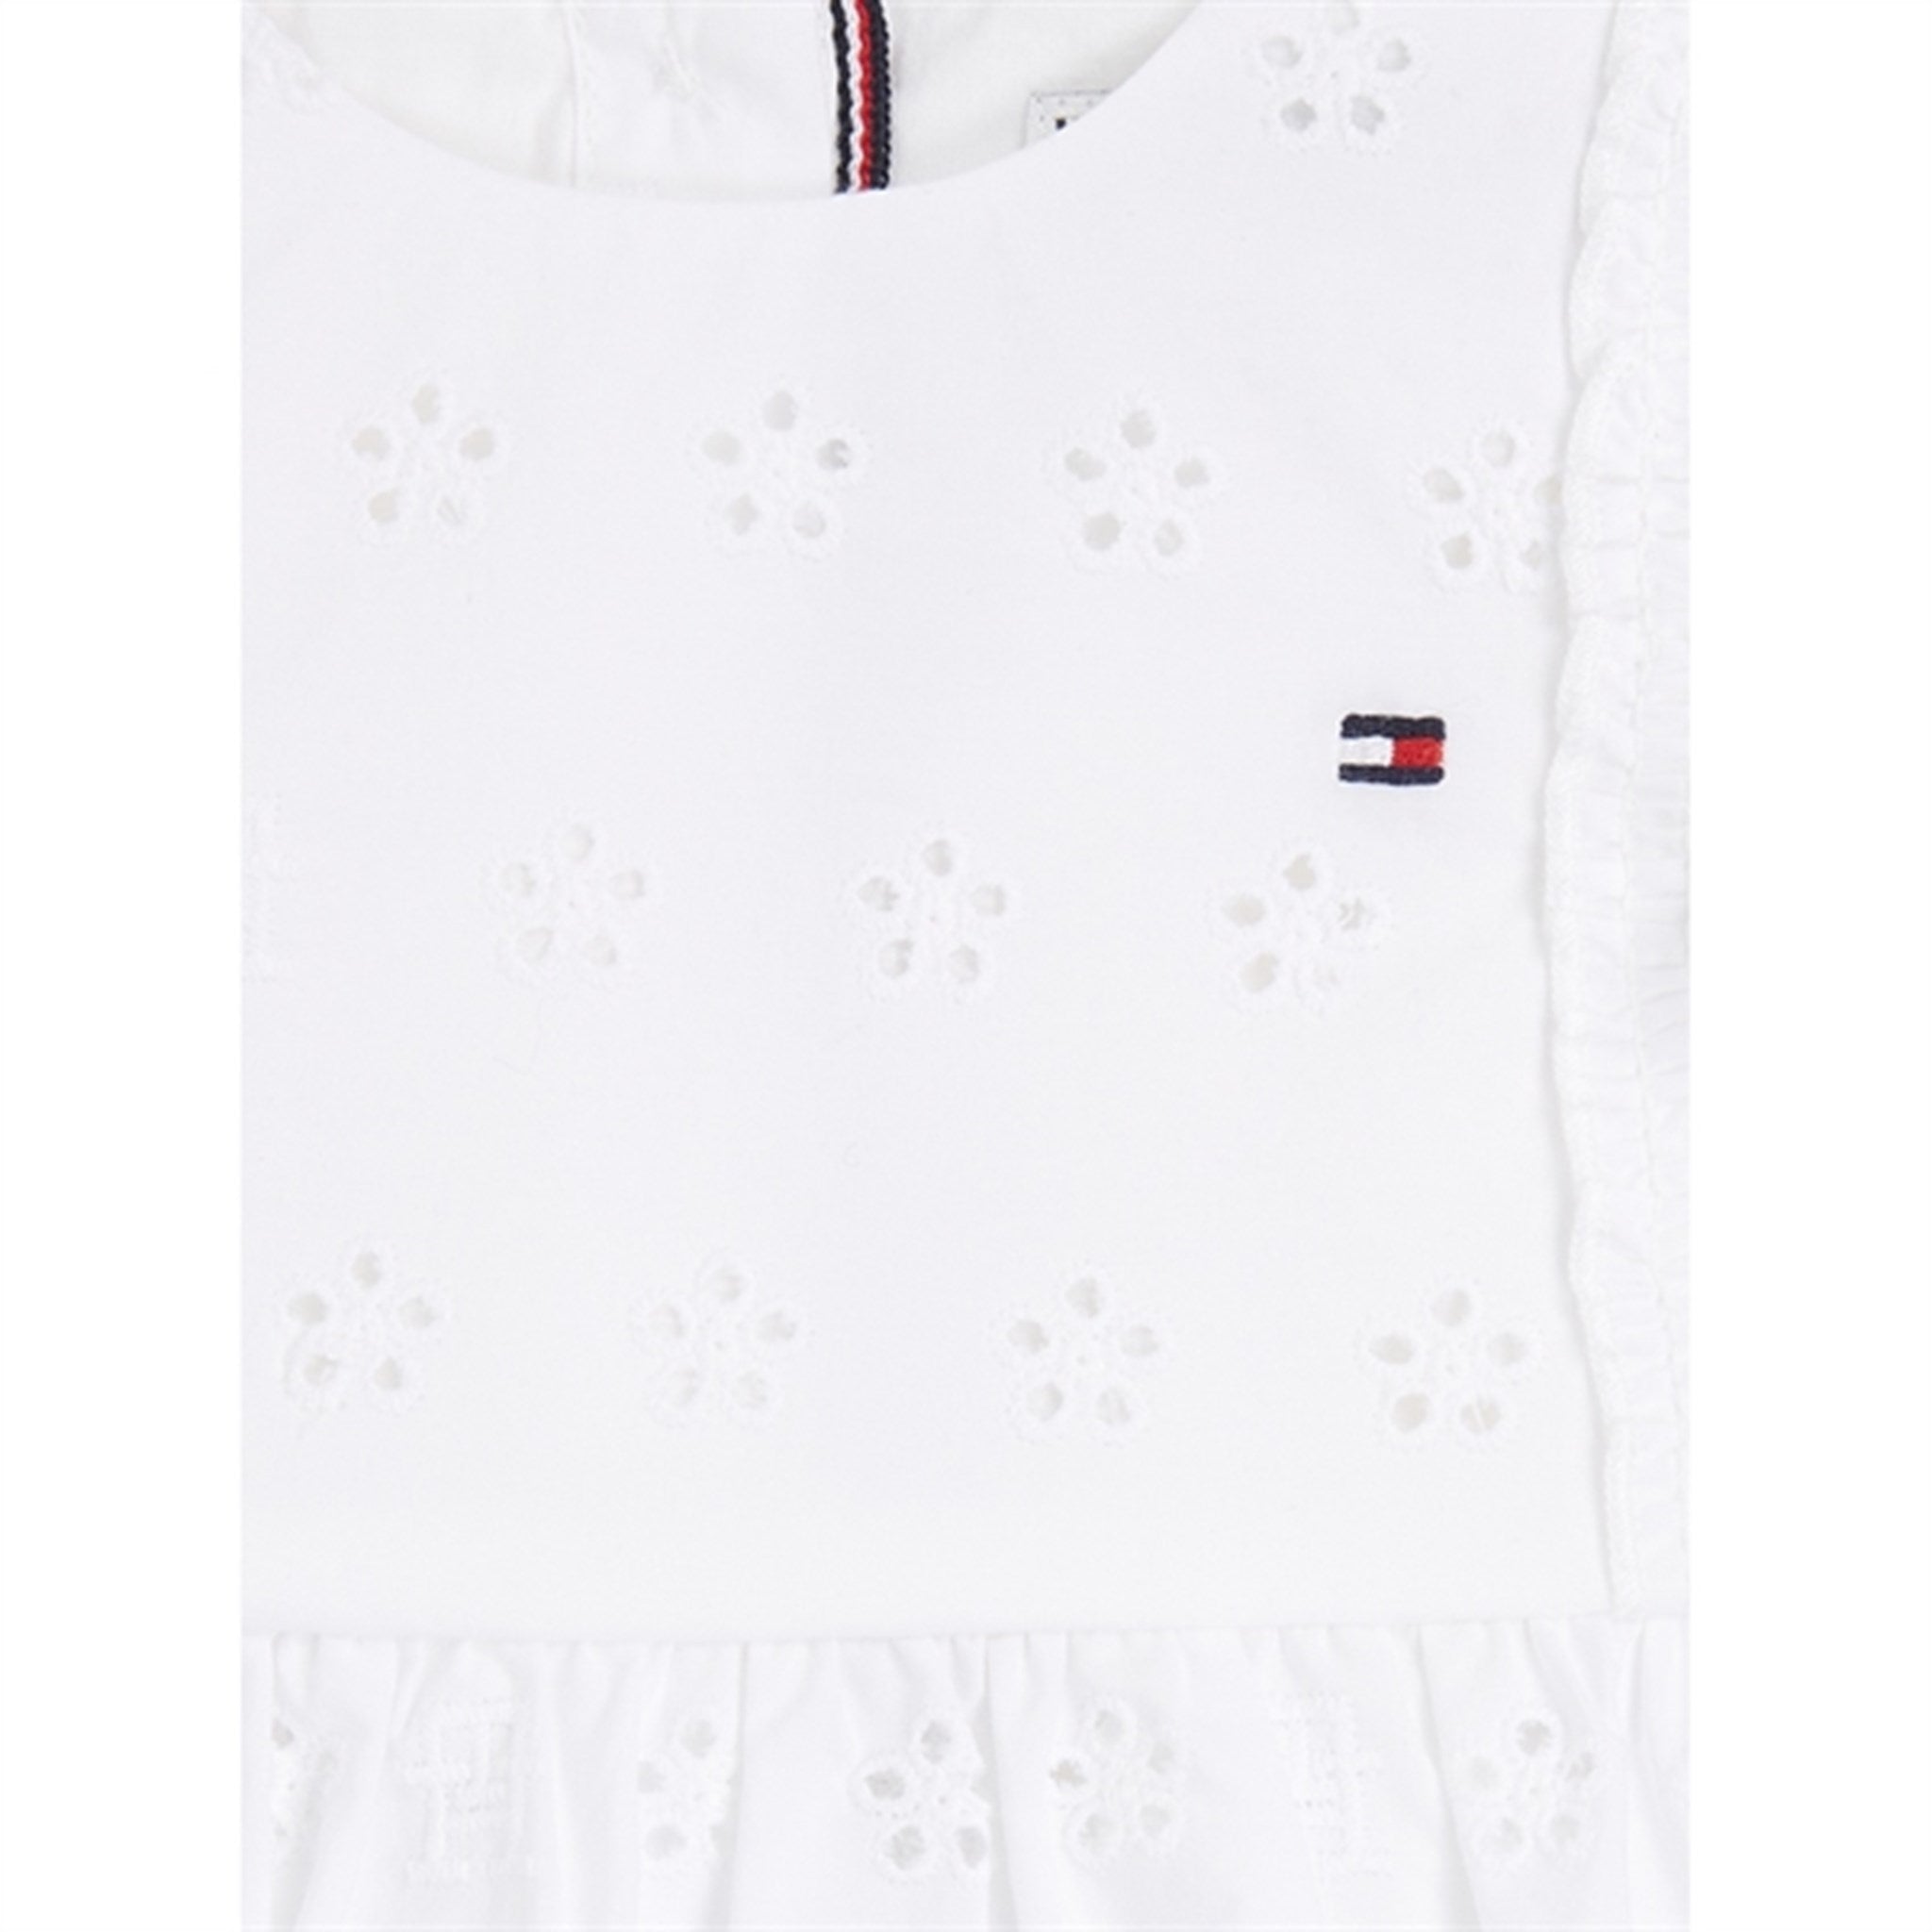 Tommy Hilfiger Baby Embroidery Dress White 2